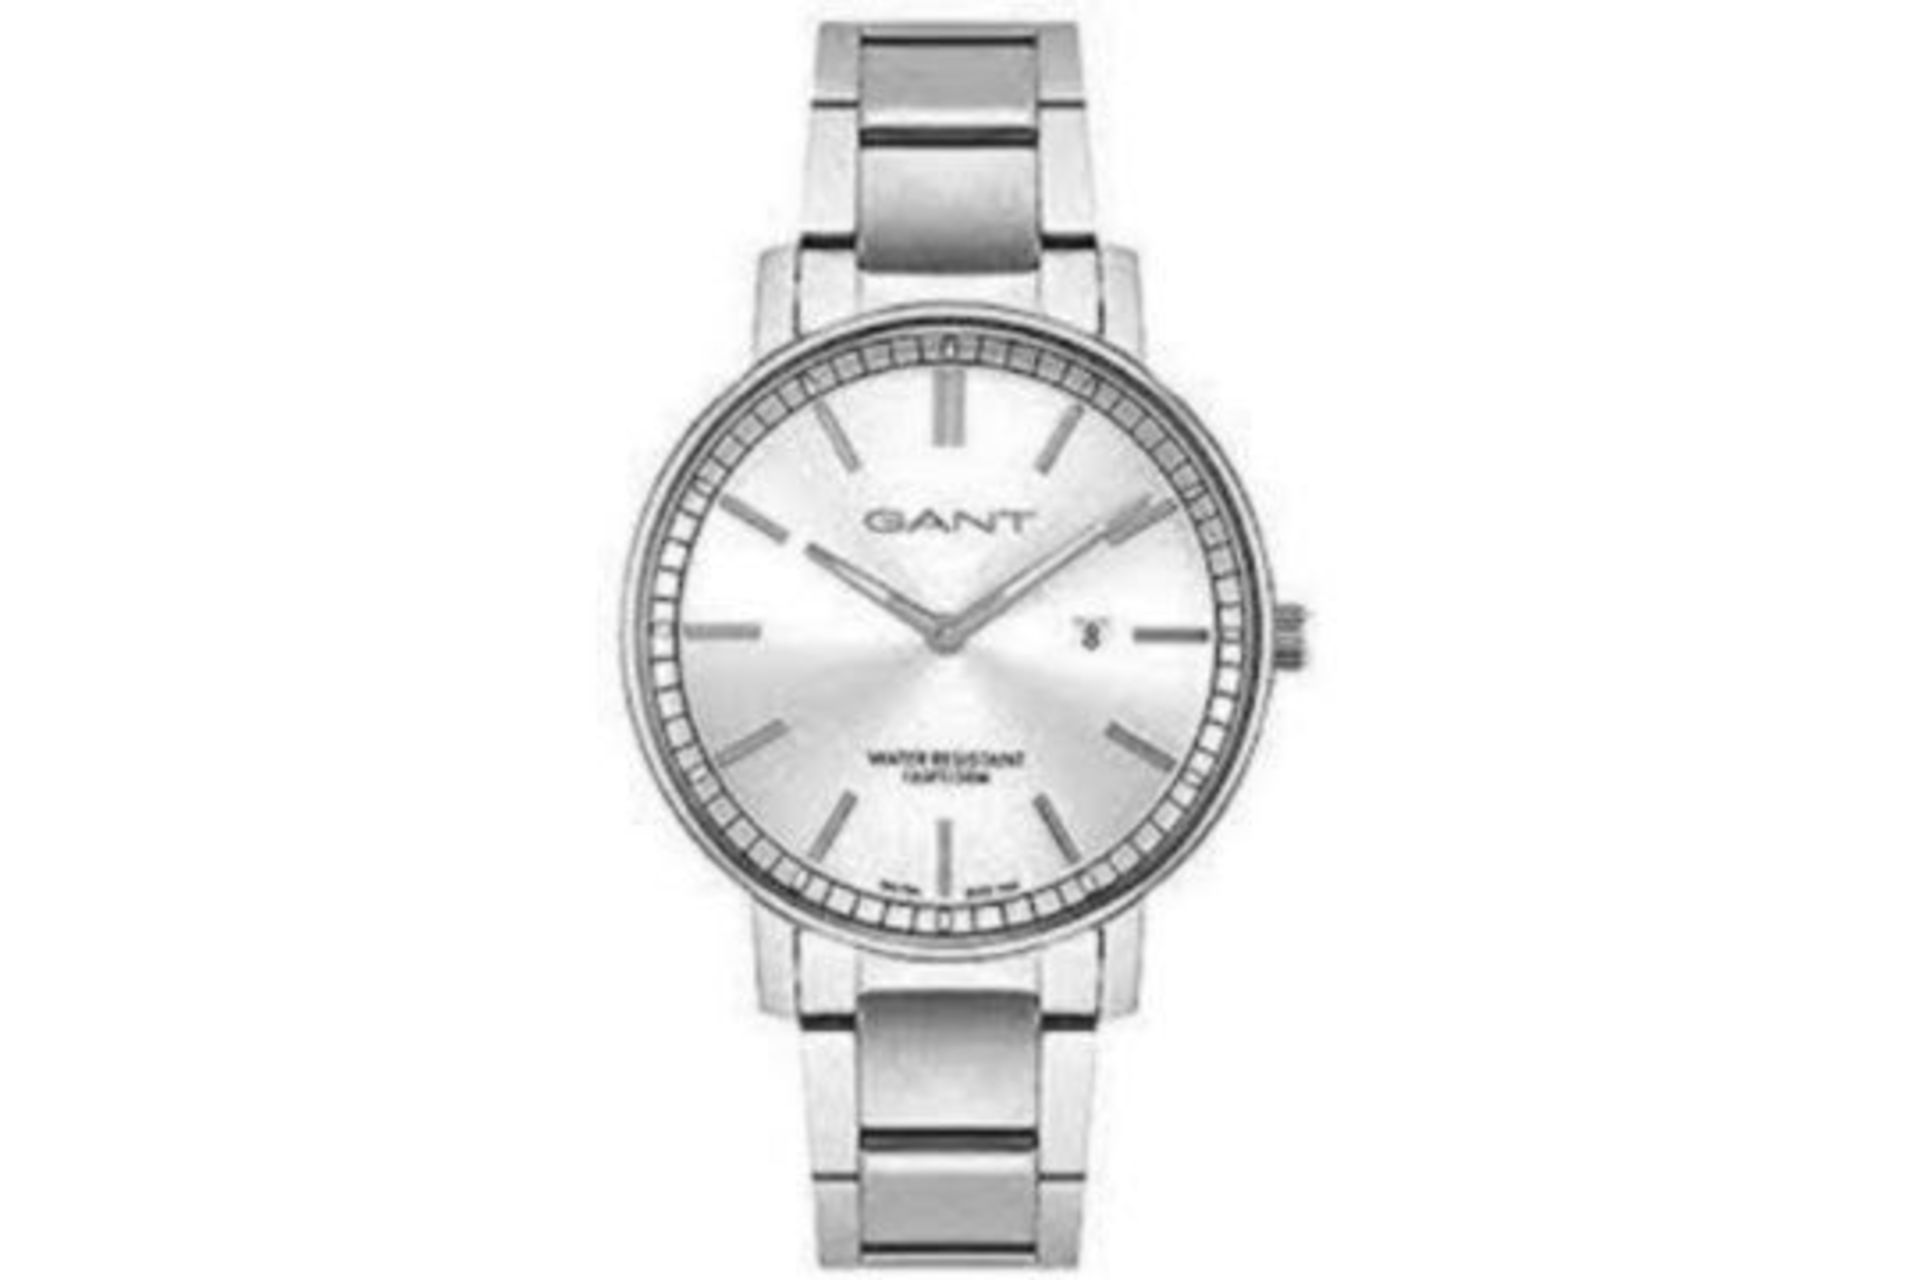 BRAND NEW GANT SILVER COLOURED FASHION WATCH RRP £229